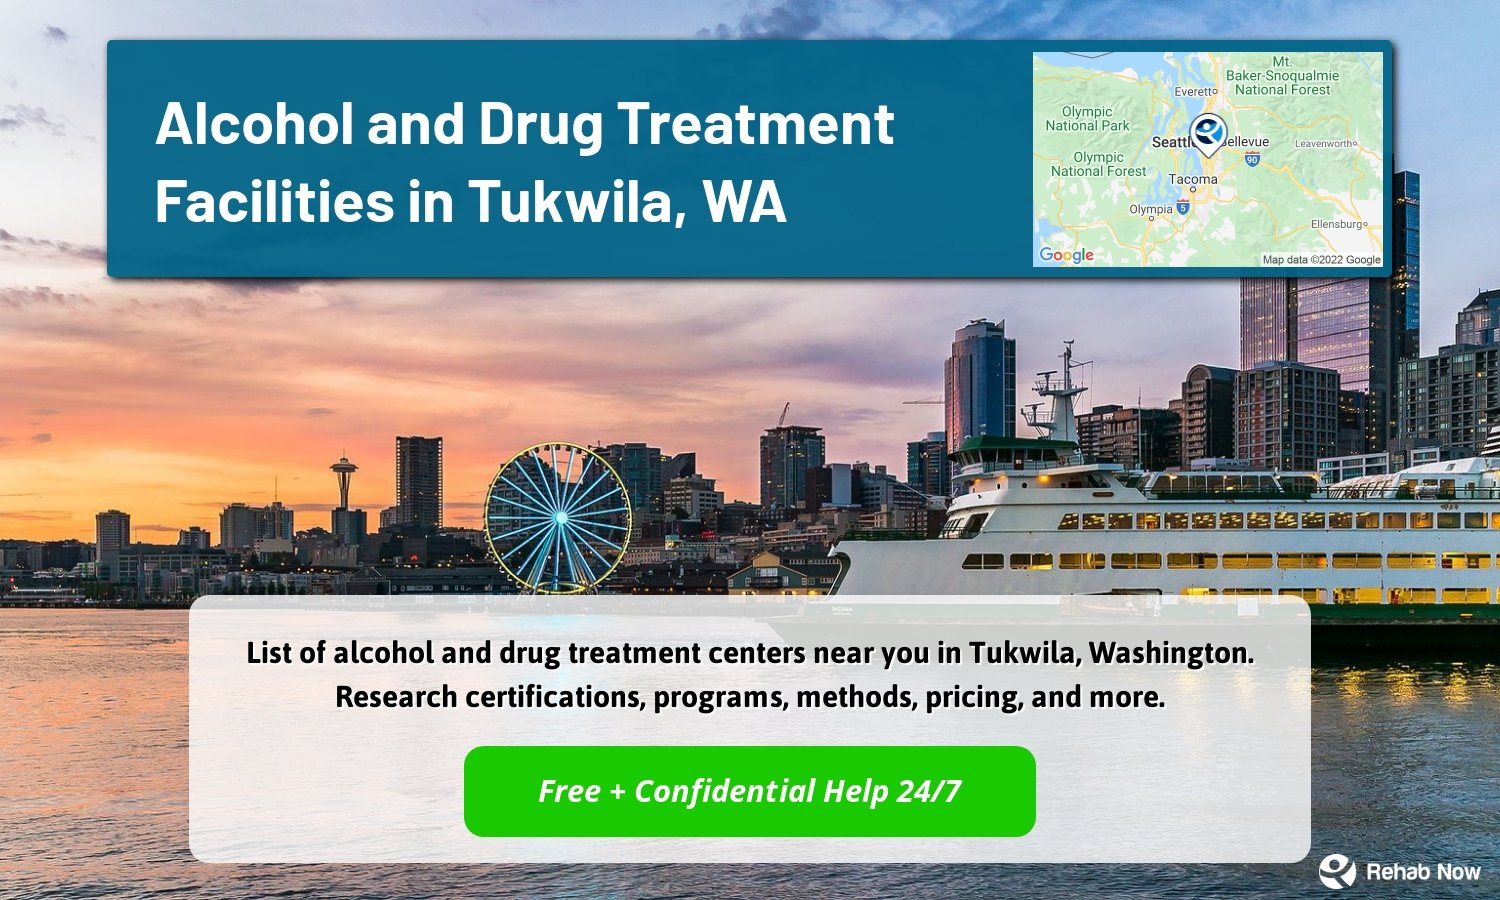 List of alcohol and drug treatment centers near you in Tukwila, Washington. Research certifications, programs, methods, pricing, and more.